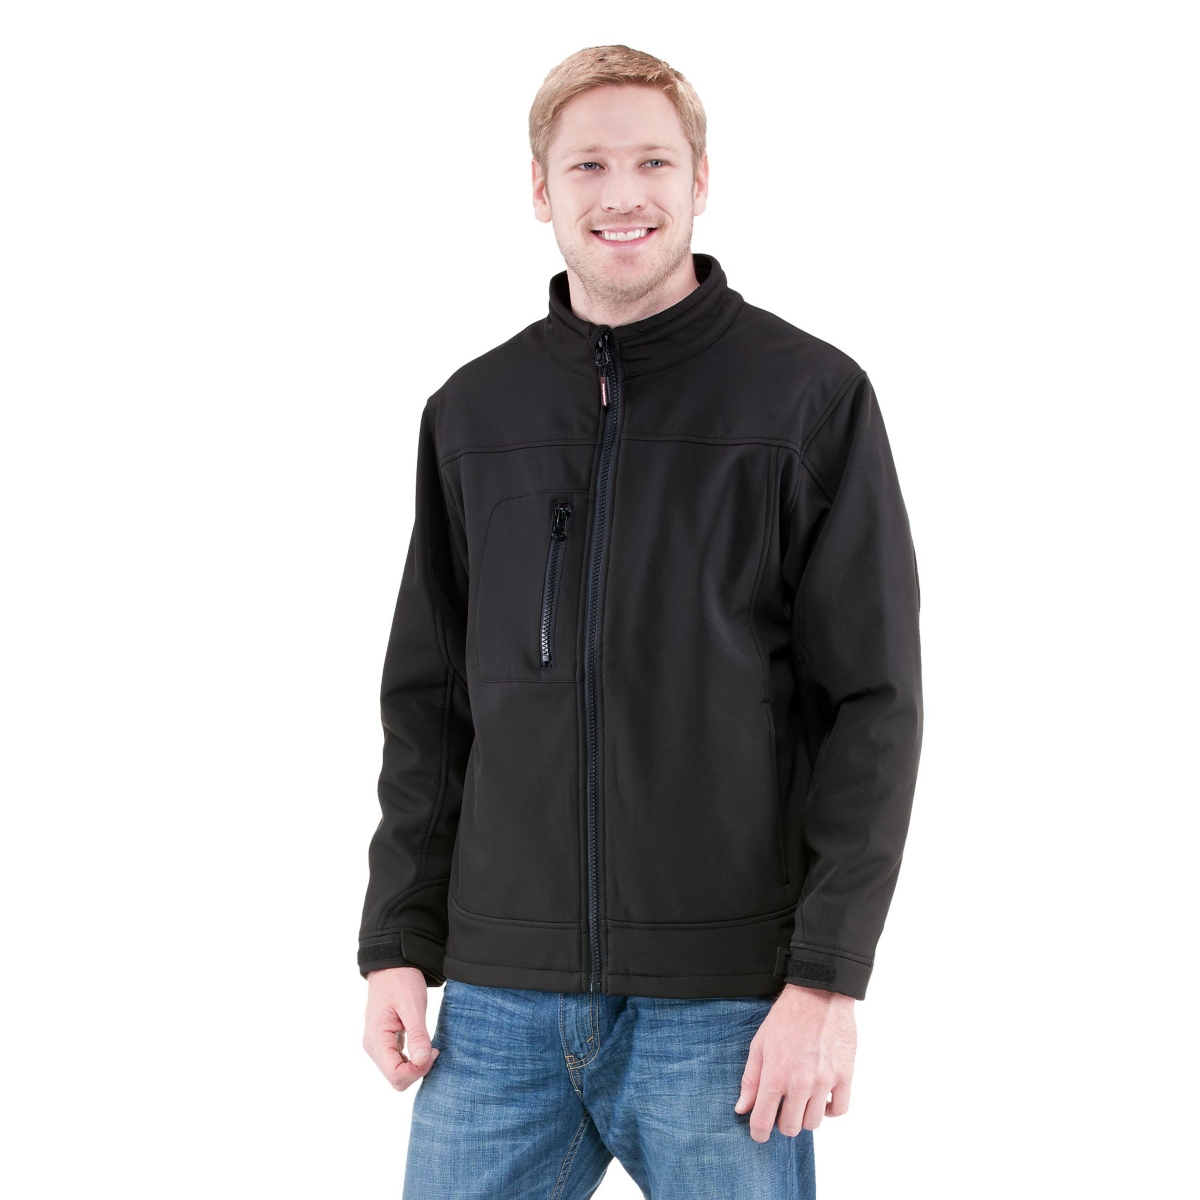 Men's Warm Insulated Softshell Jacket with Soft Micro-Fleece Lining - Black